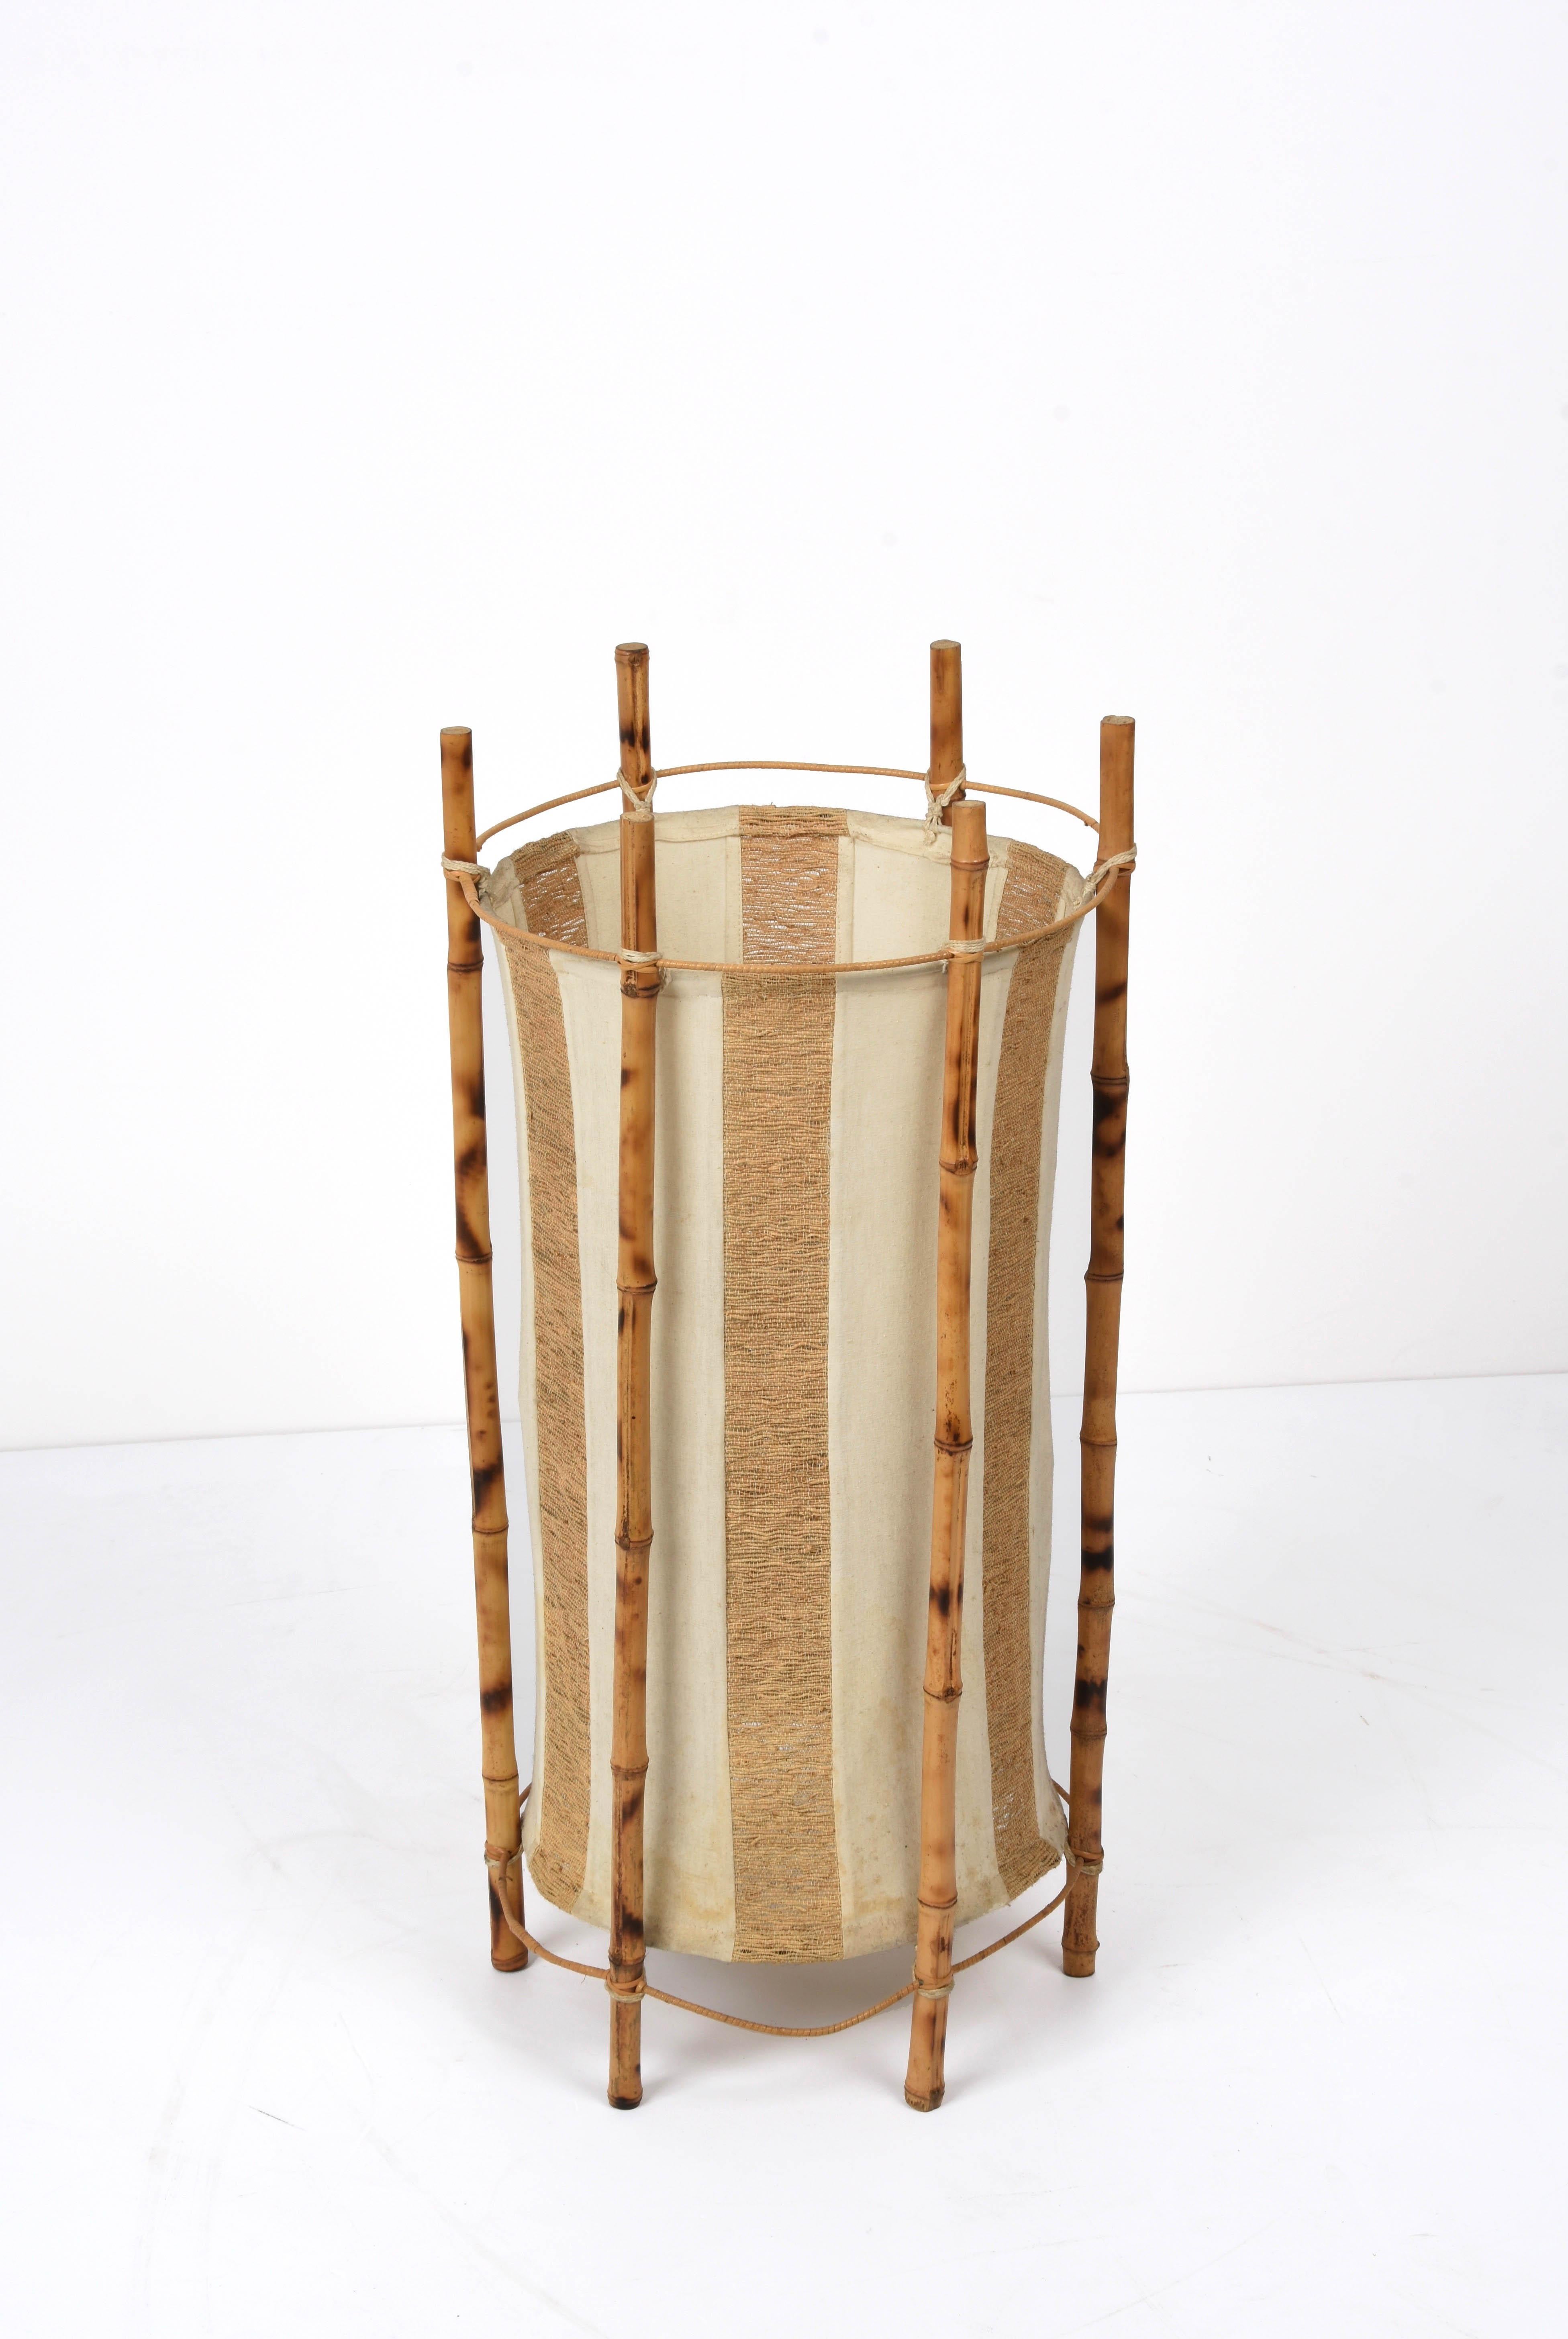 Wonderful mid-century floor or even table lamp in bamboo and rattan. This wonderful piece was made in France in the 1960s in the style of Louis Sognot.

The outer structure is made up of six bamboo and rattan bamboo stems and contains a cylindrical